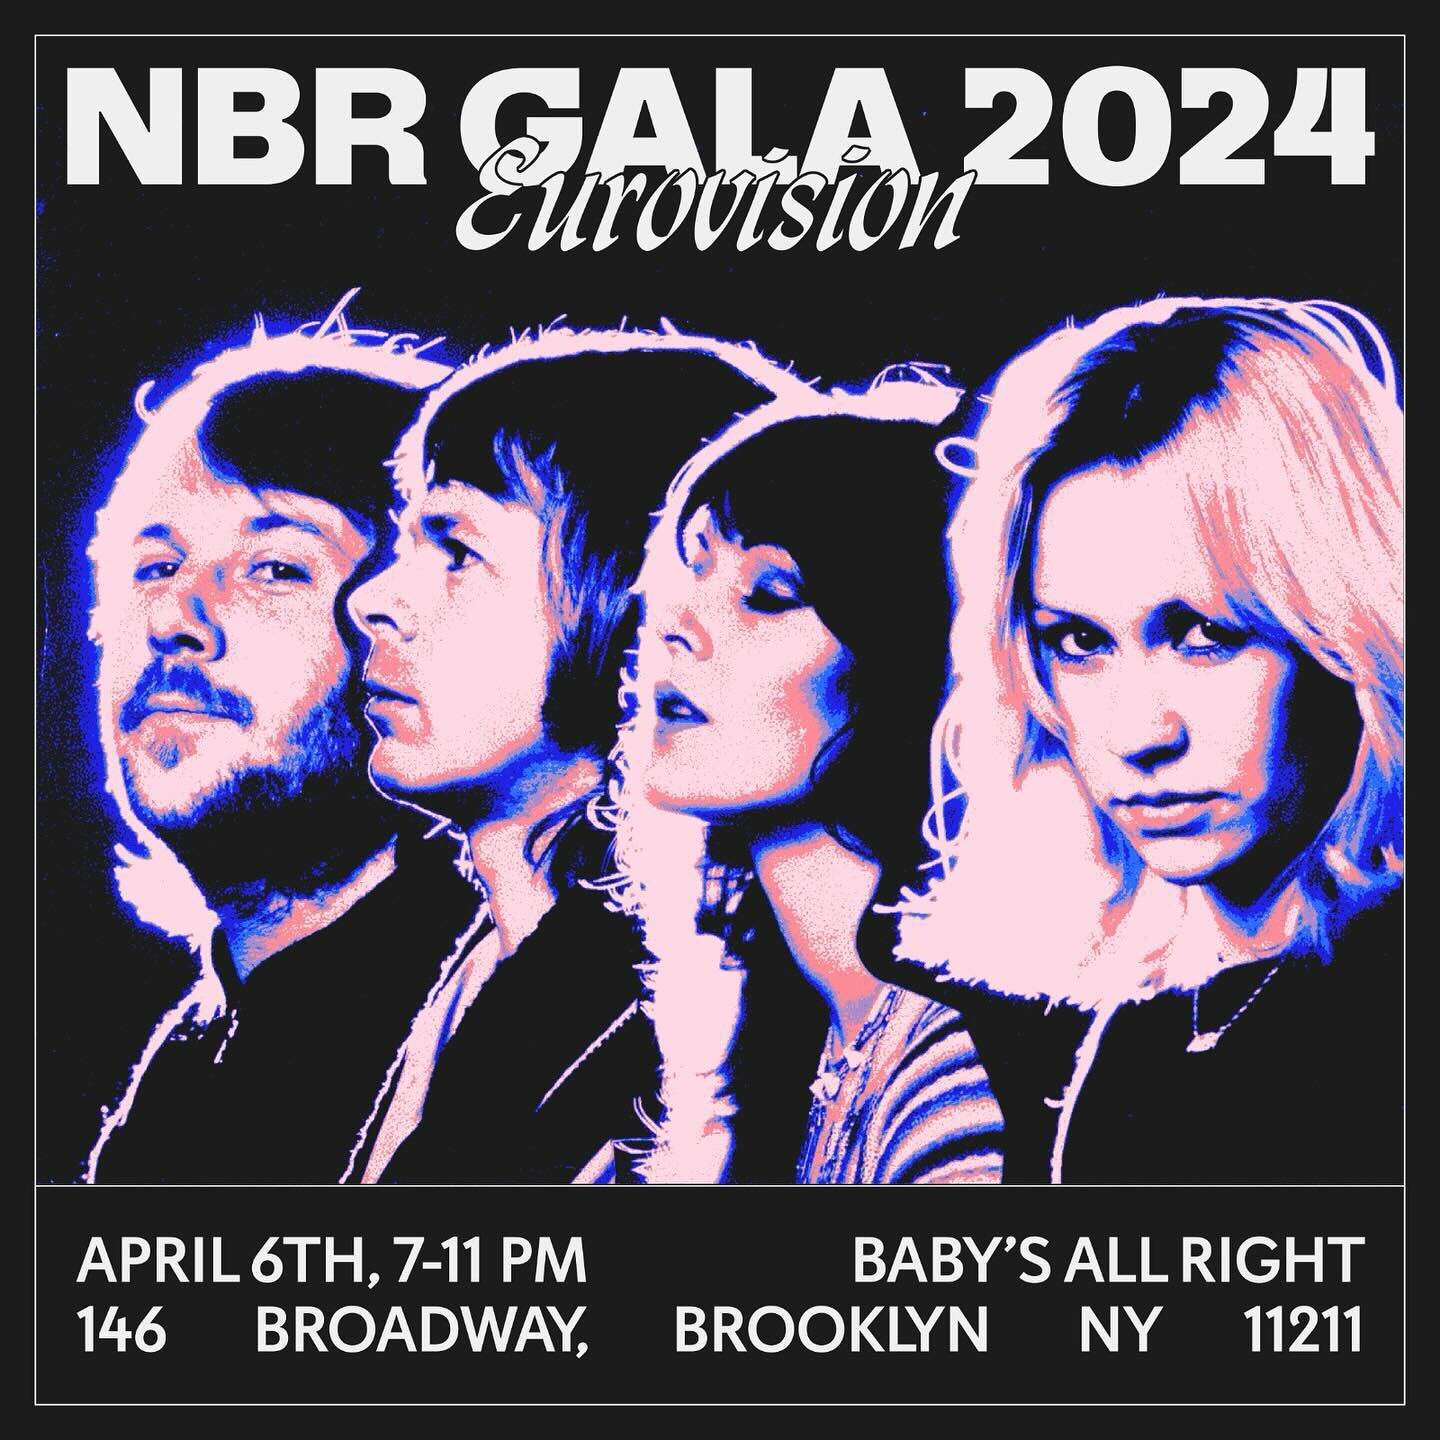 💃🪩NBR GALA 2024🪩🕺🔔

Dance the night away with old friends, new friends, training partners, race rivals in your best Eurovision themed fits!

This year our social squad is sparing no effort to bring you a splendid party: 3 hours of open bar, lite